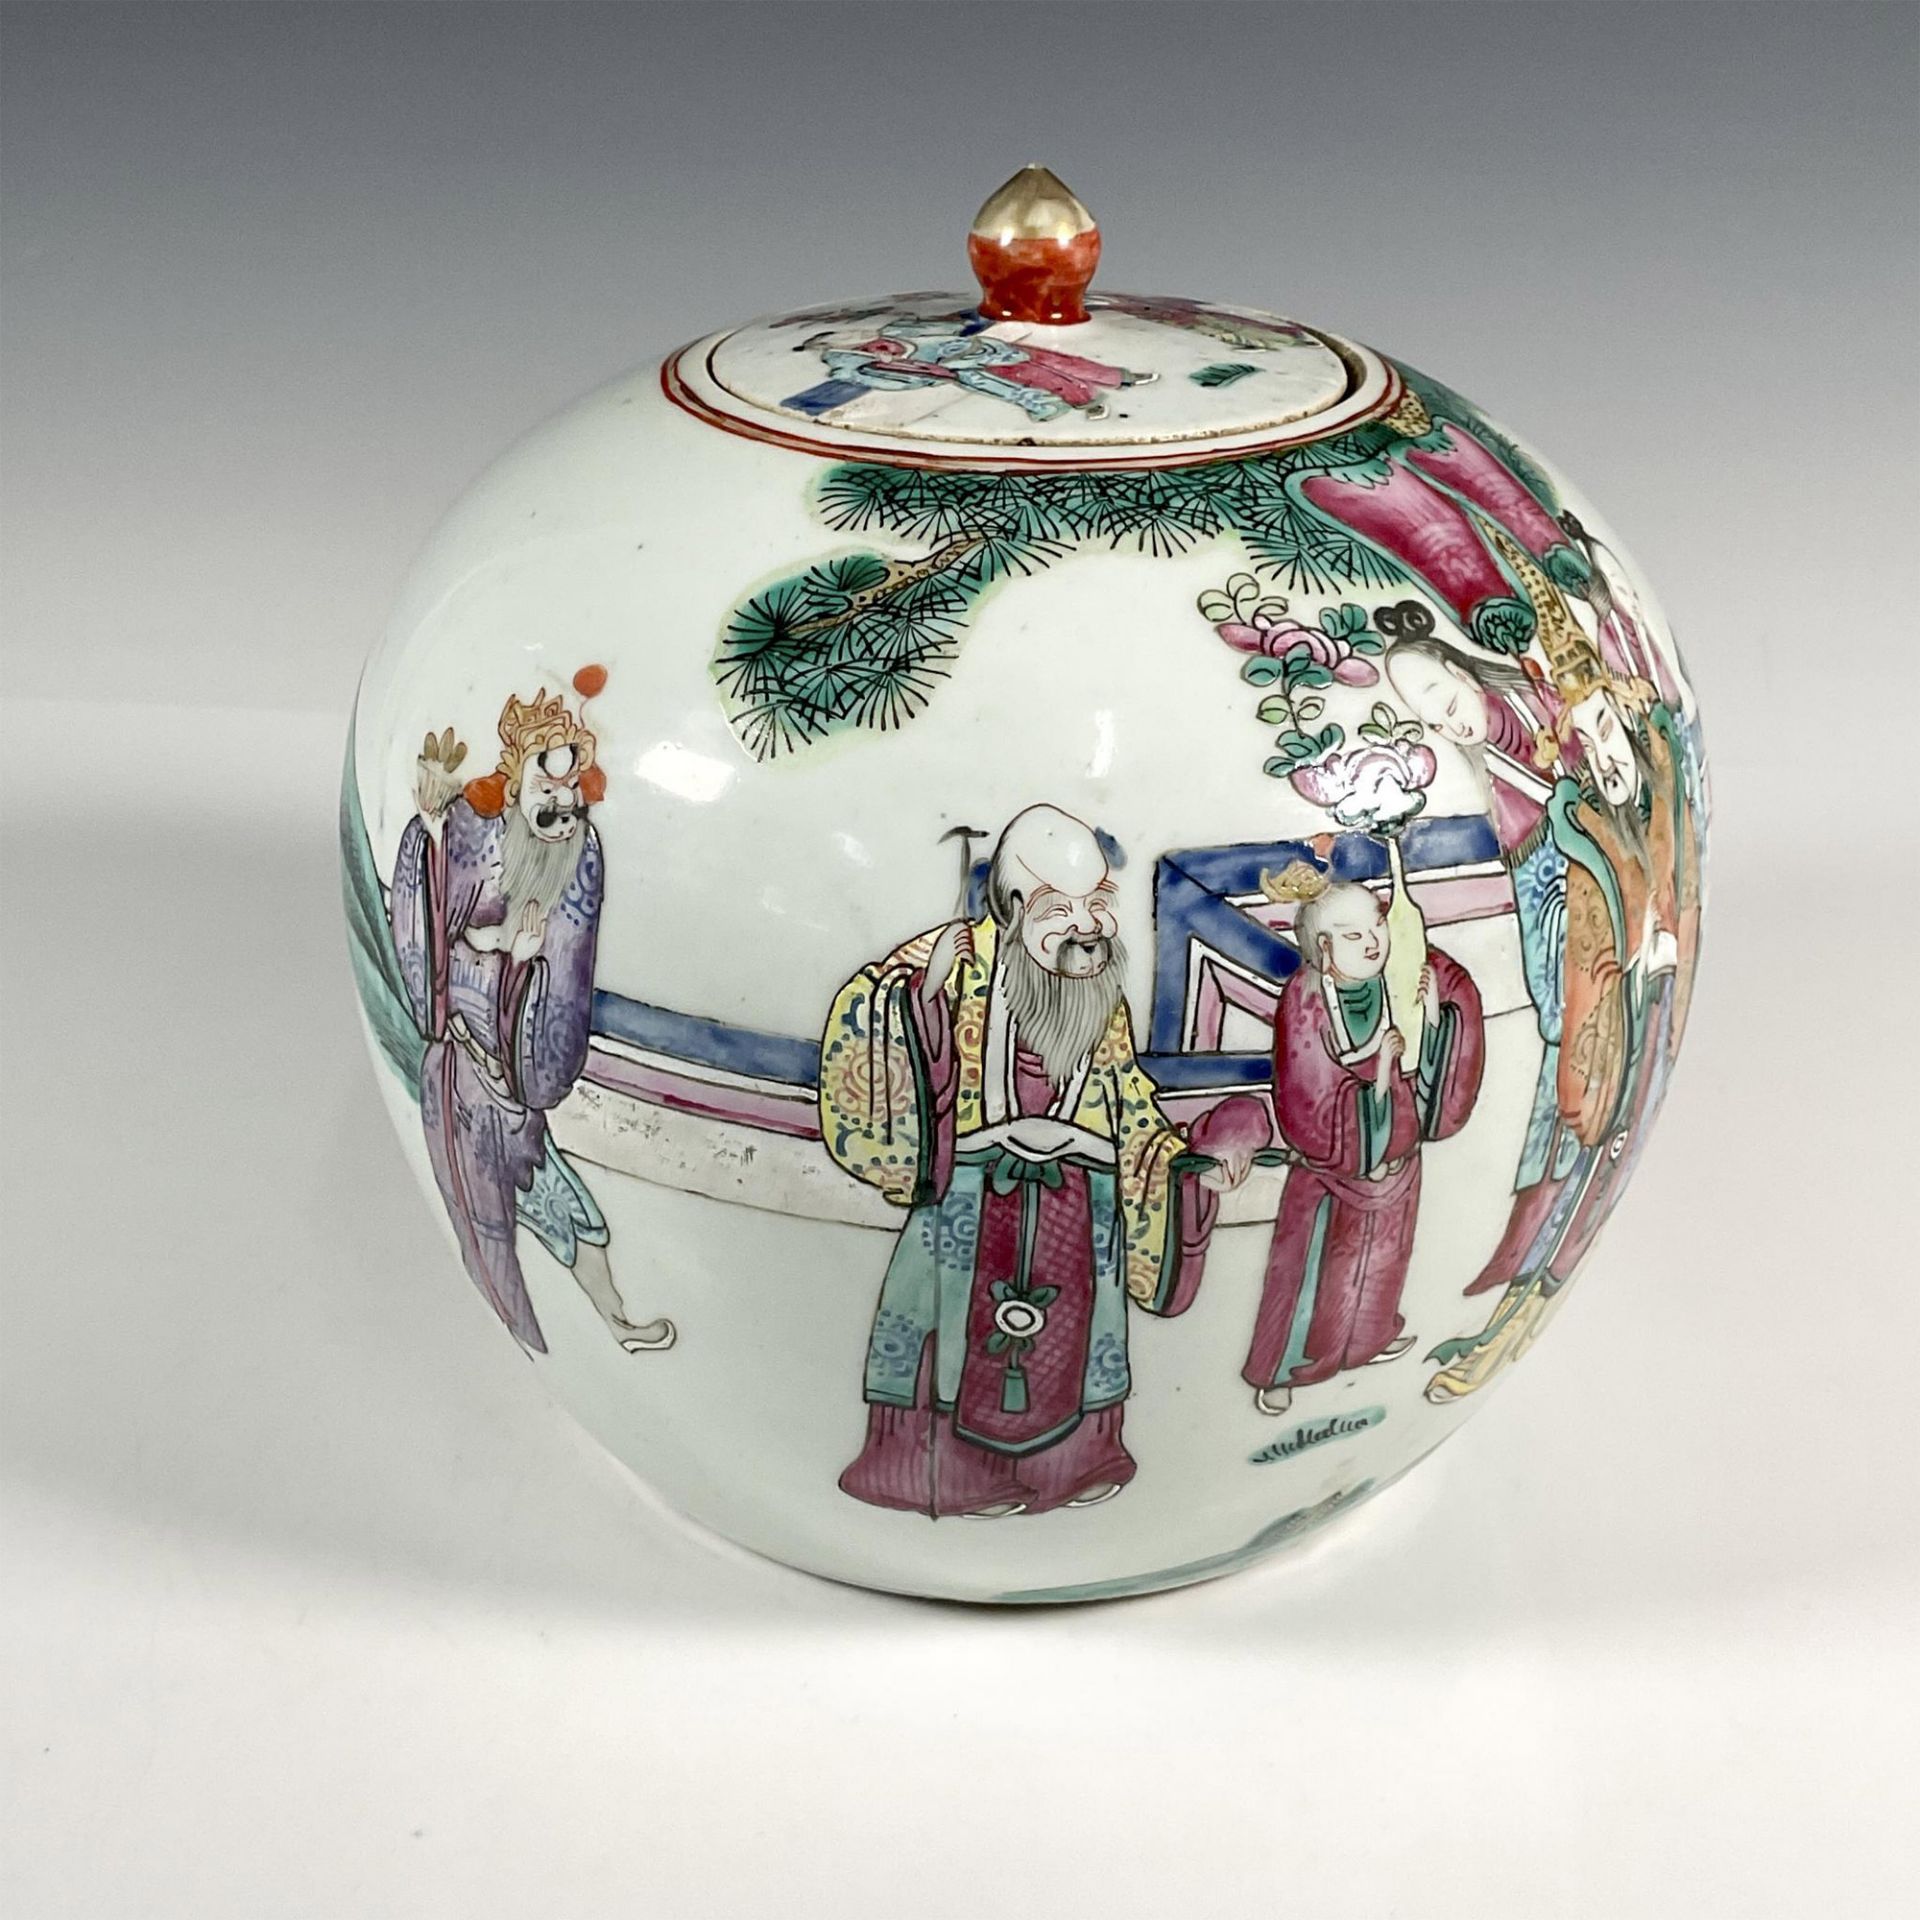 Chinese Qing Dynasty Porcelain Covered Ginger Pot - Image 4 of 5